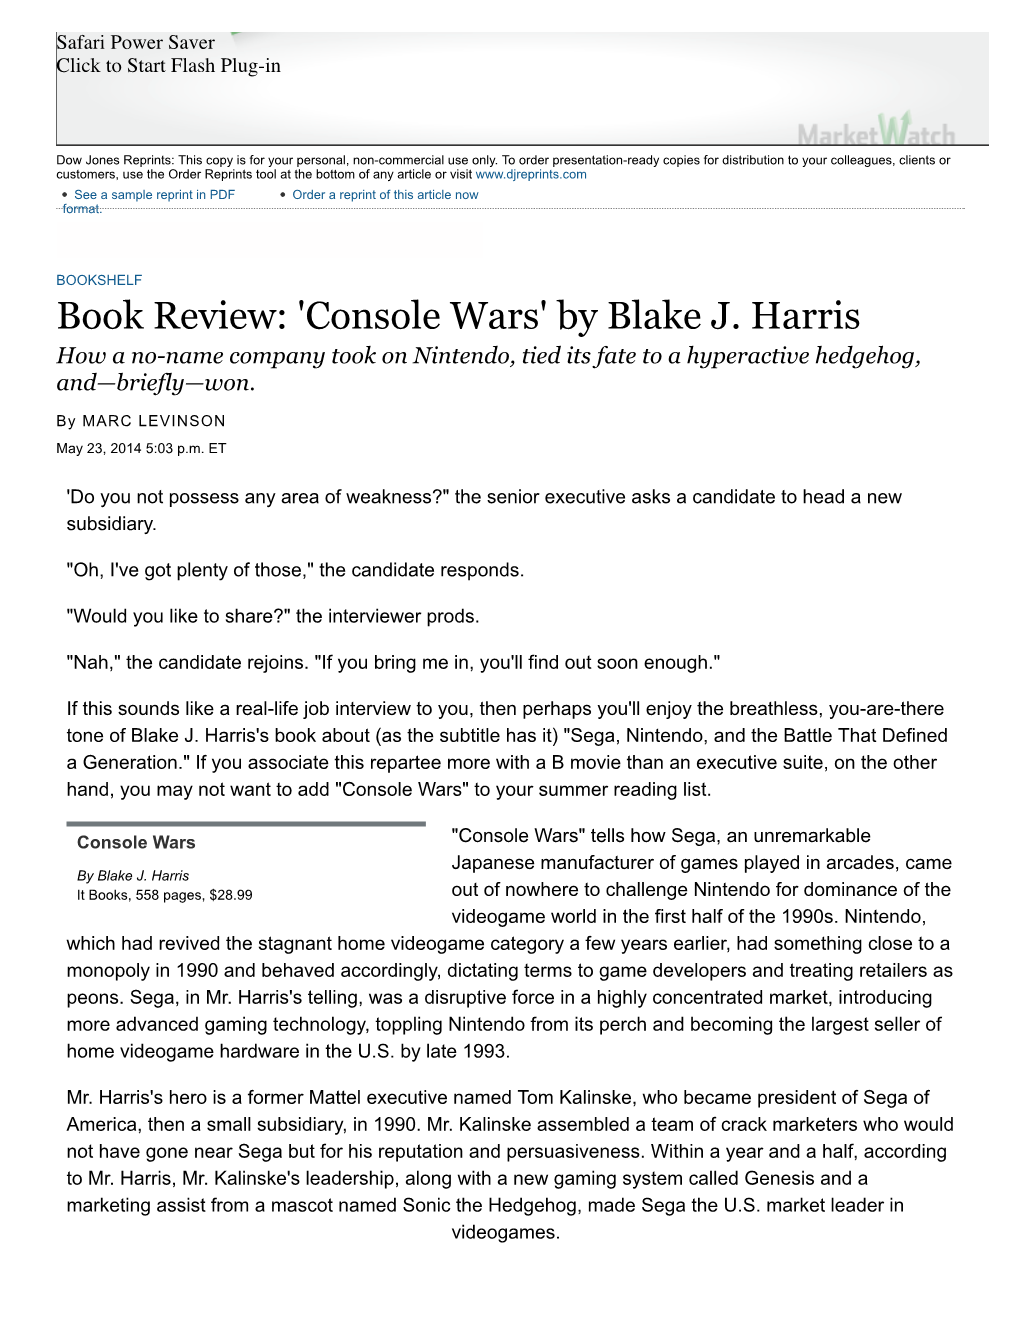 Book Review: 'Console Wars' by Blake J. Harris How a No-Name Company Took on Nintendo, Tied Its Fate to a Hyperactive Hedgehog, And—Briefly—Won